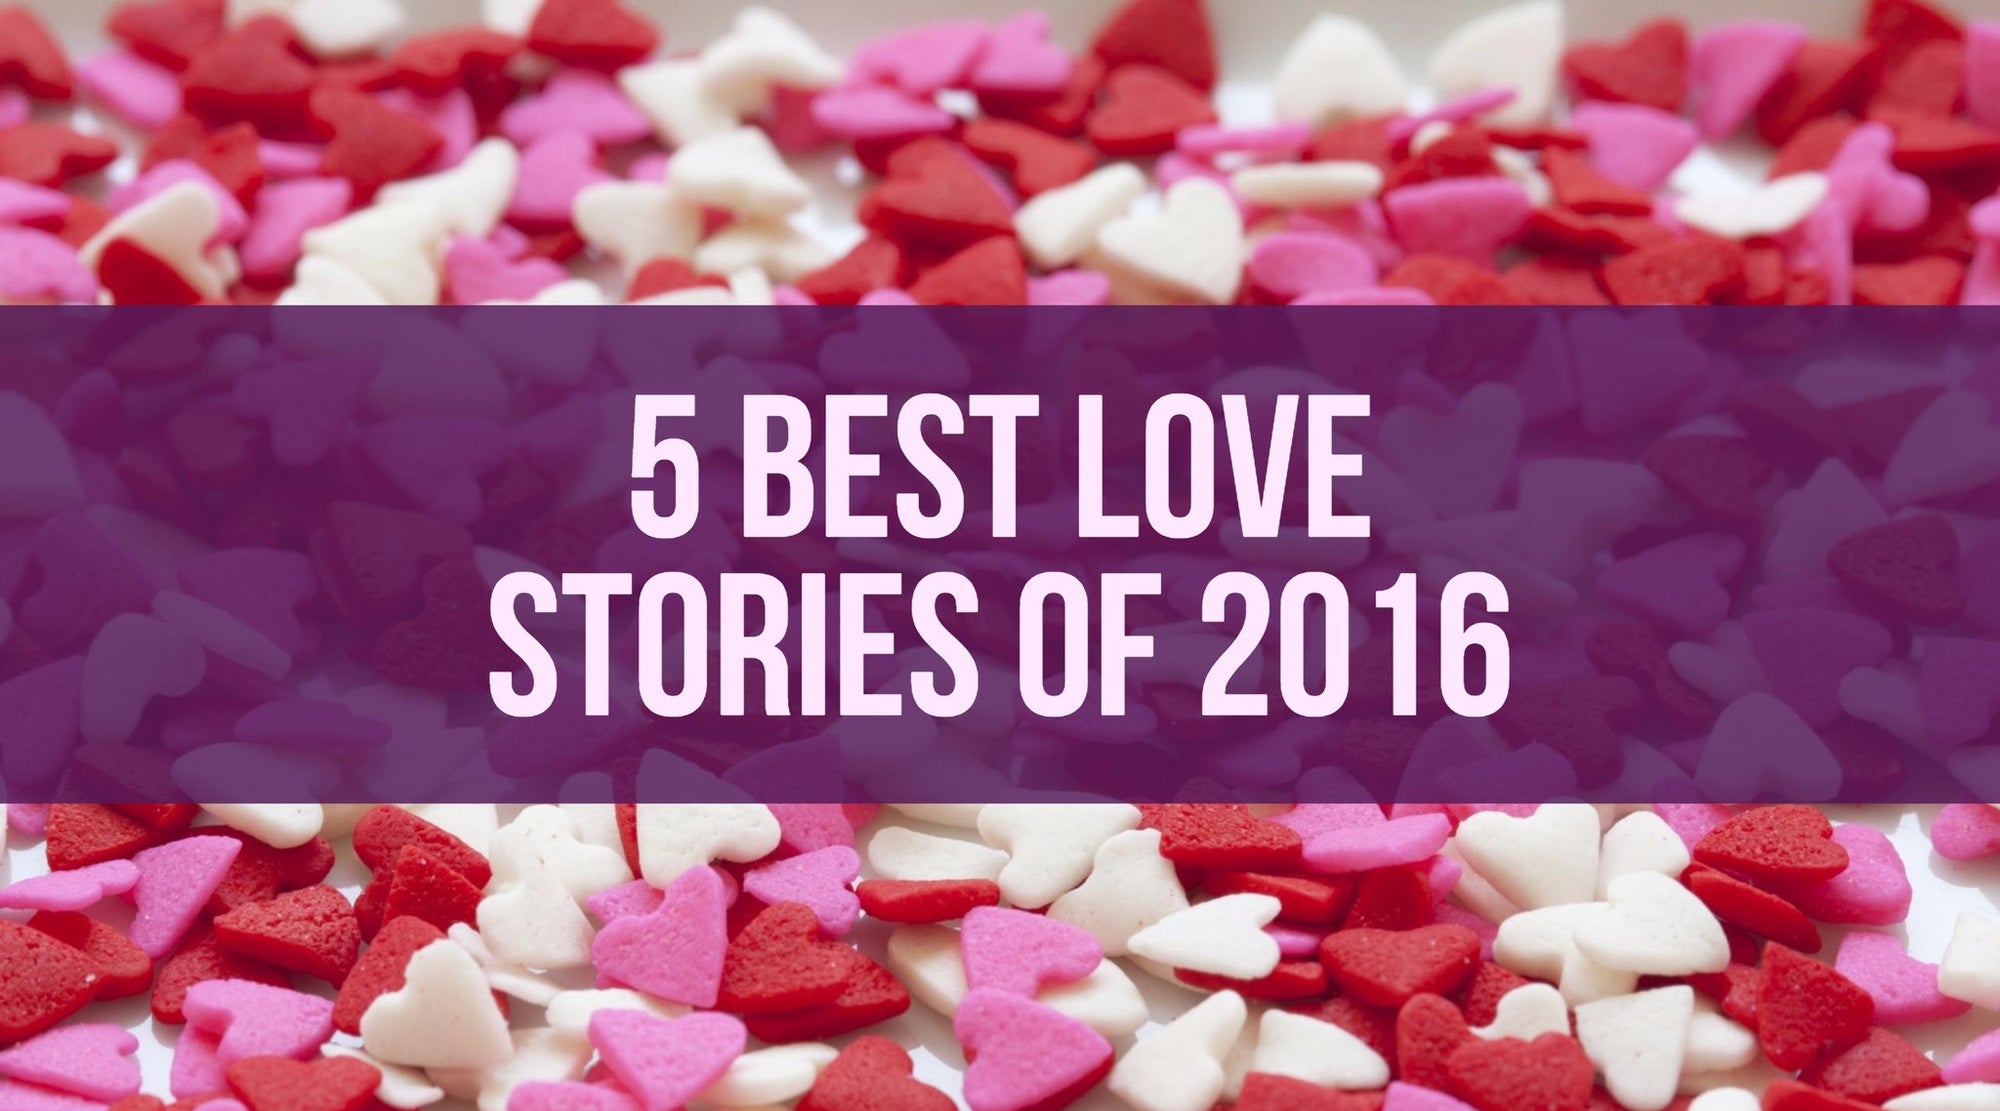 The 5 Best Love Stories of 2016